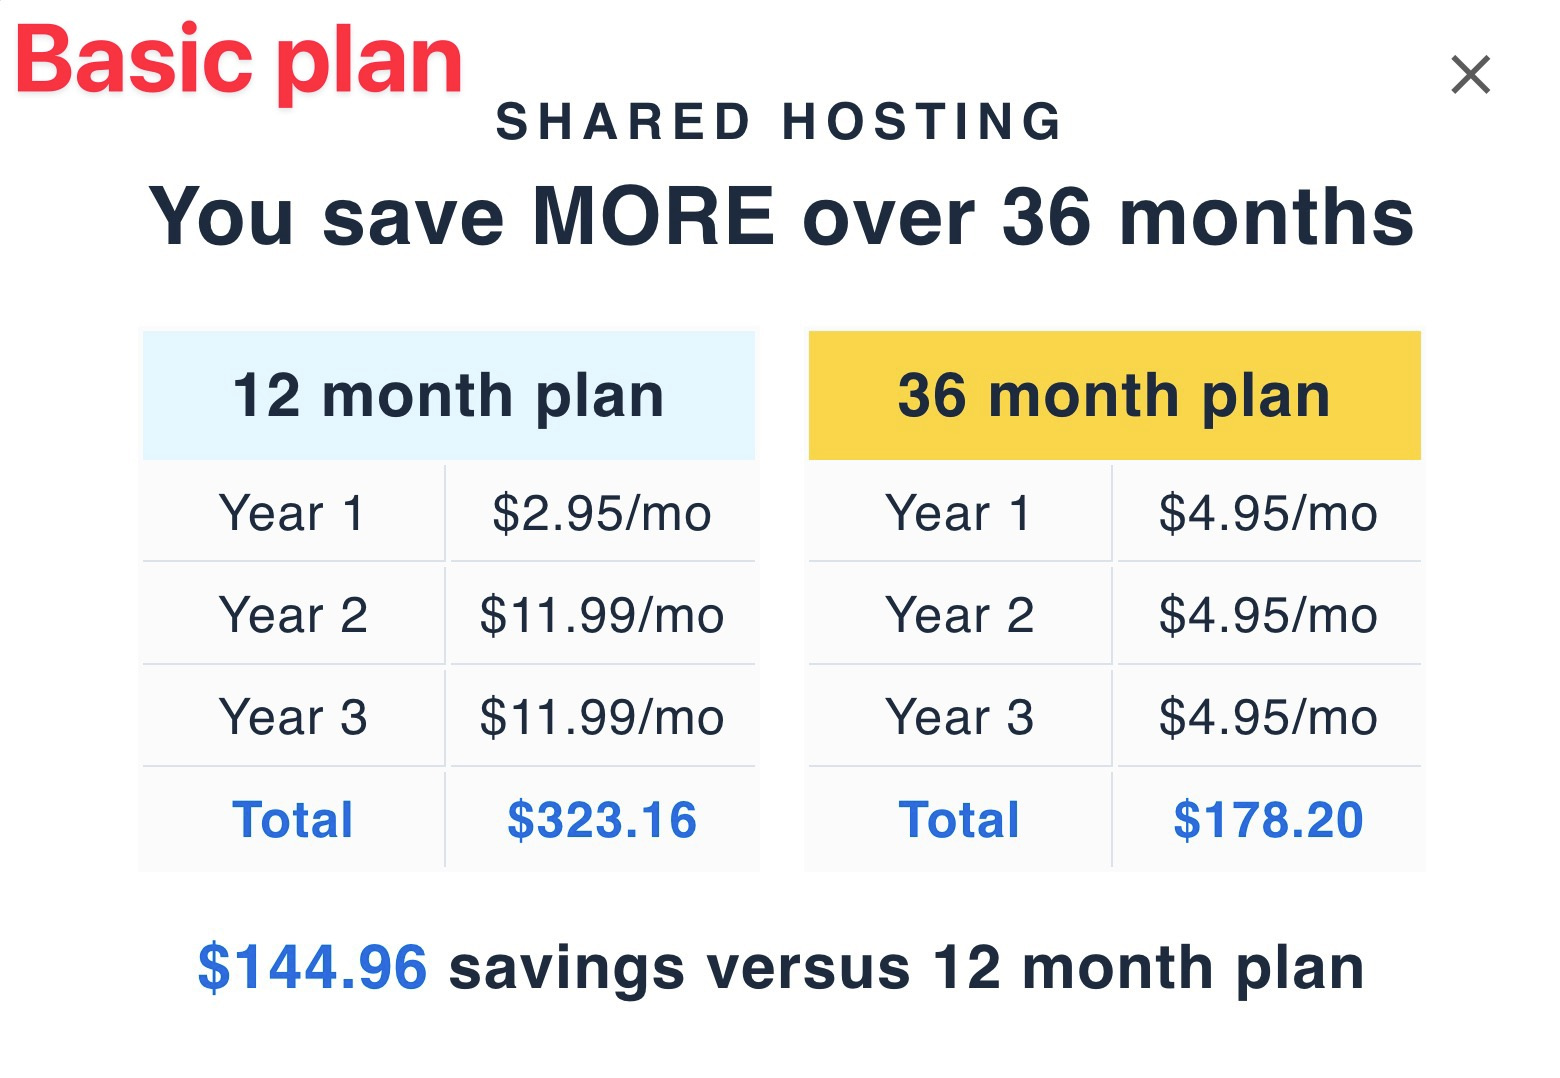 Bluehost review of pricing plans by duration.